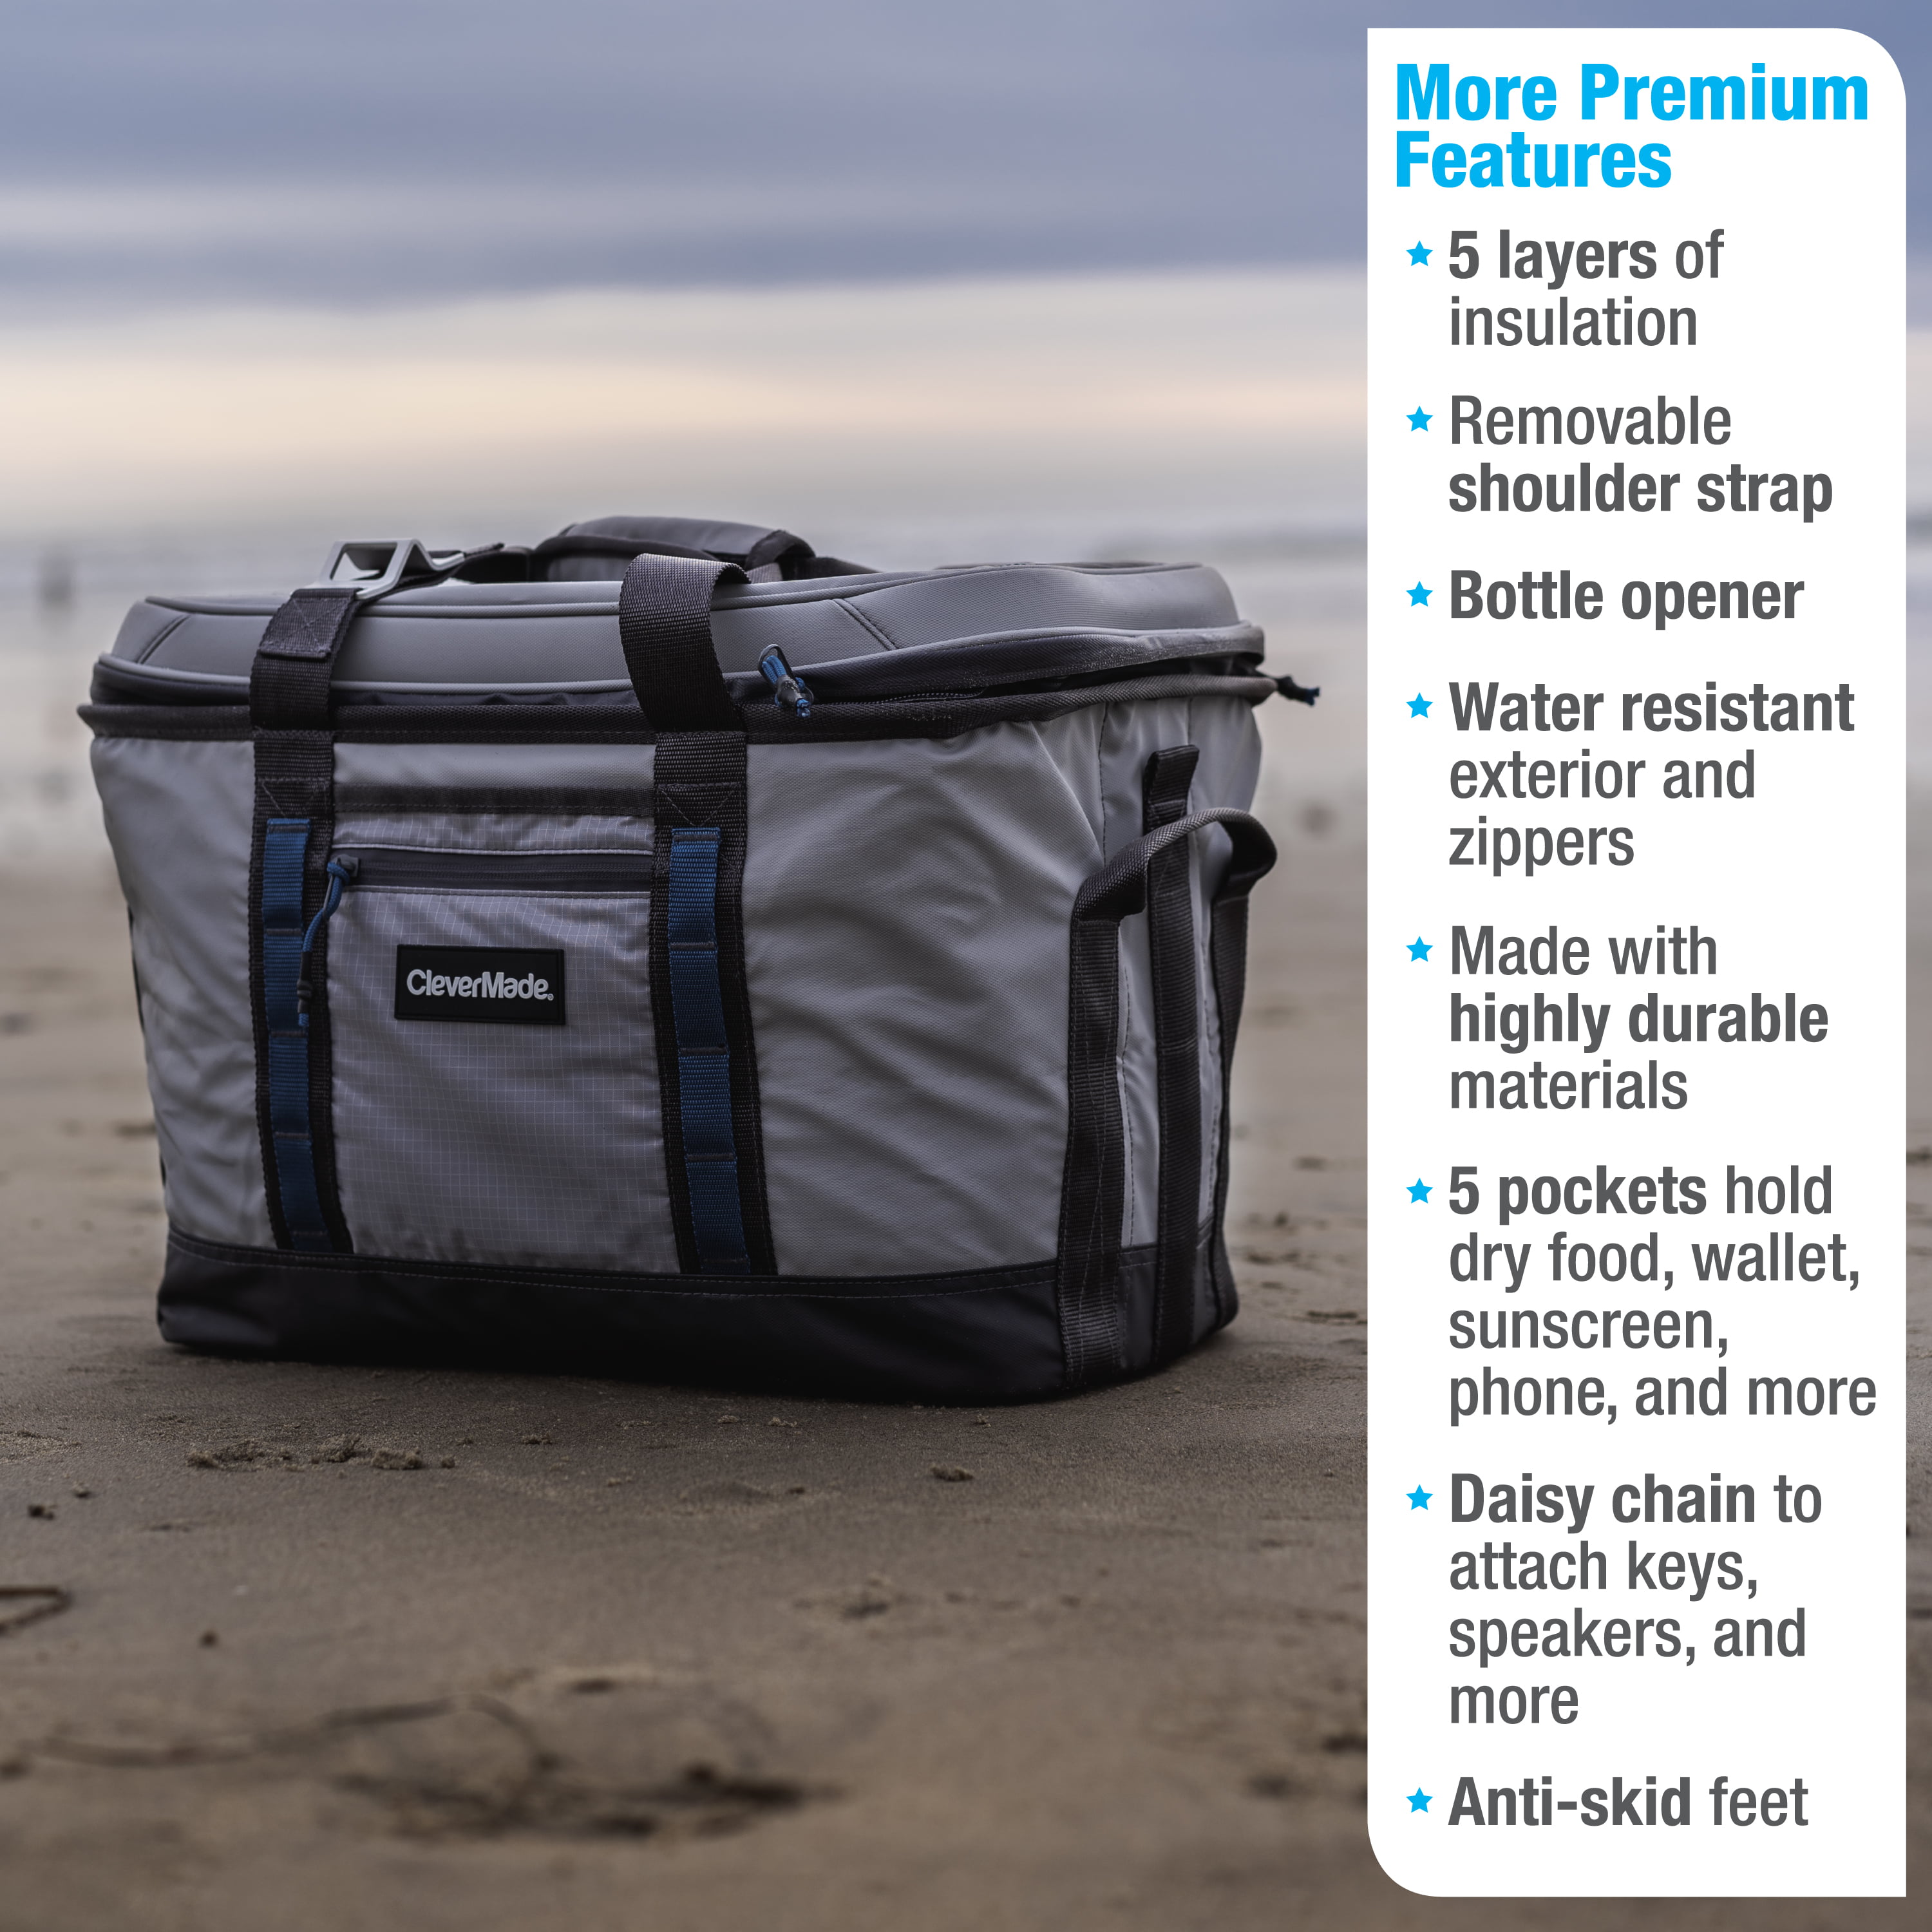 CleverMade Tahoe Collapsible Cooler Bag, 50 Can - Structured, Leakproof  Coolers for Travel with Built-In Bottle Opener - Soft-Sided, Insulated  Camping